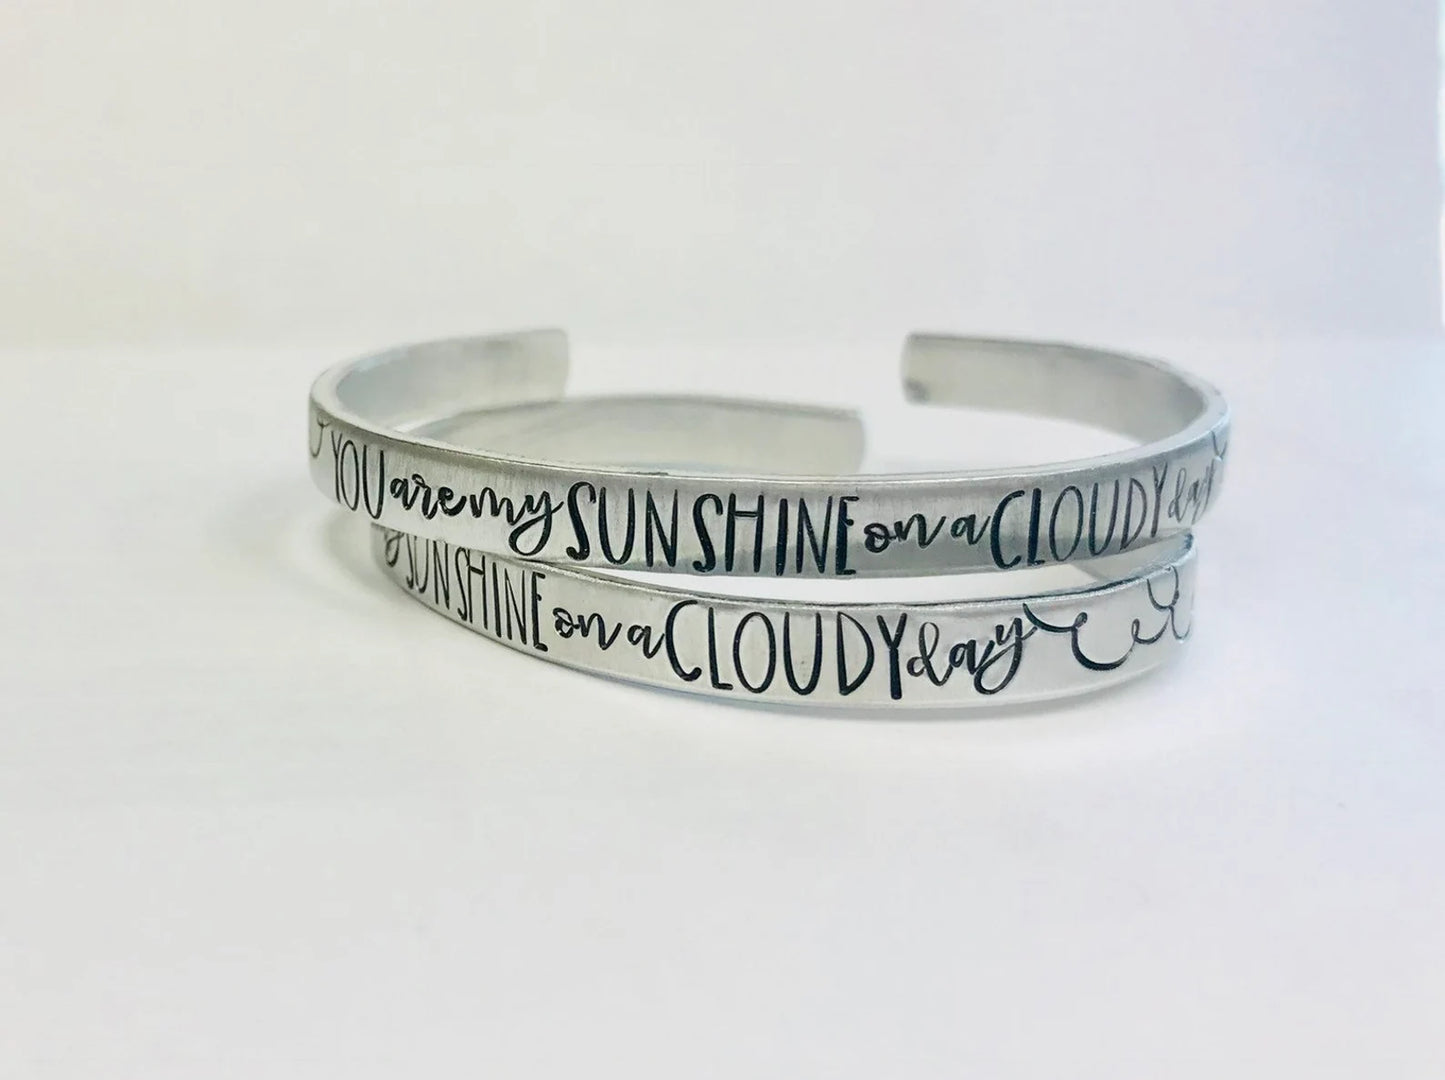 You are my sunshine on a cloudy day hand stamped best friend positvity sobriety depression my only sunshine jewelry lupus bracelet cuff